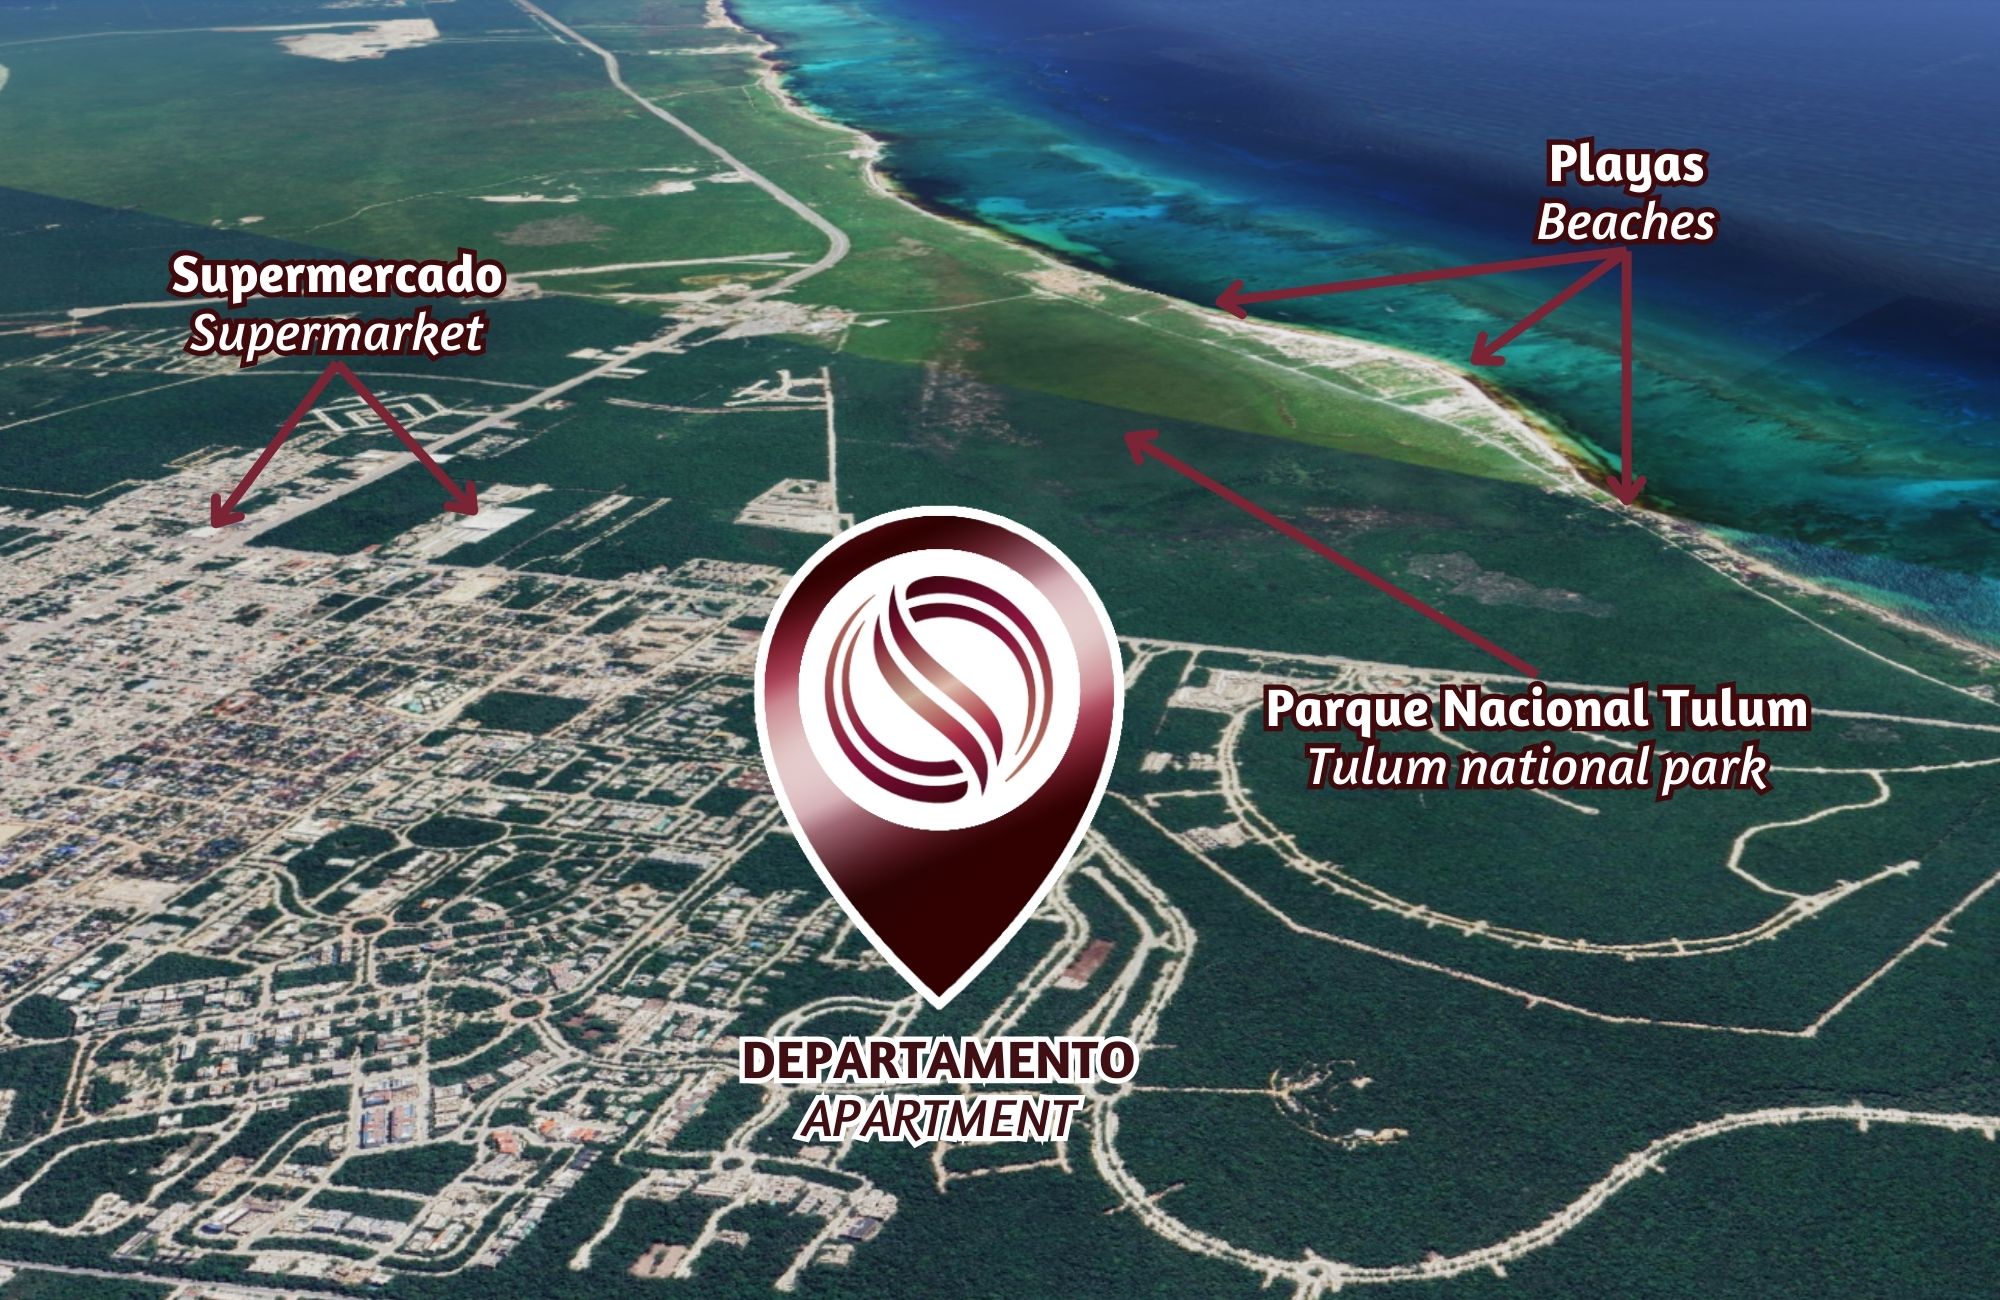 Condo with private pool, outdoor dining, solar panels, surrounded by green, yoga area, in region 15 of Tulum, for sale.